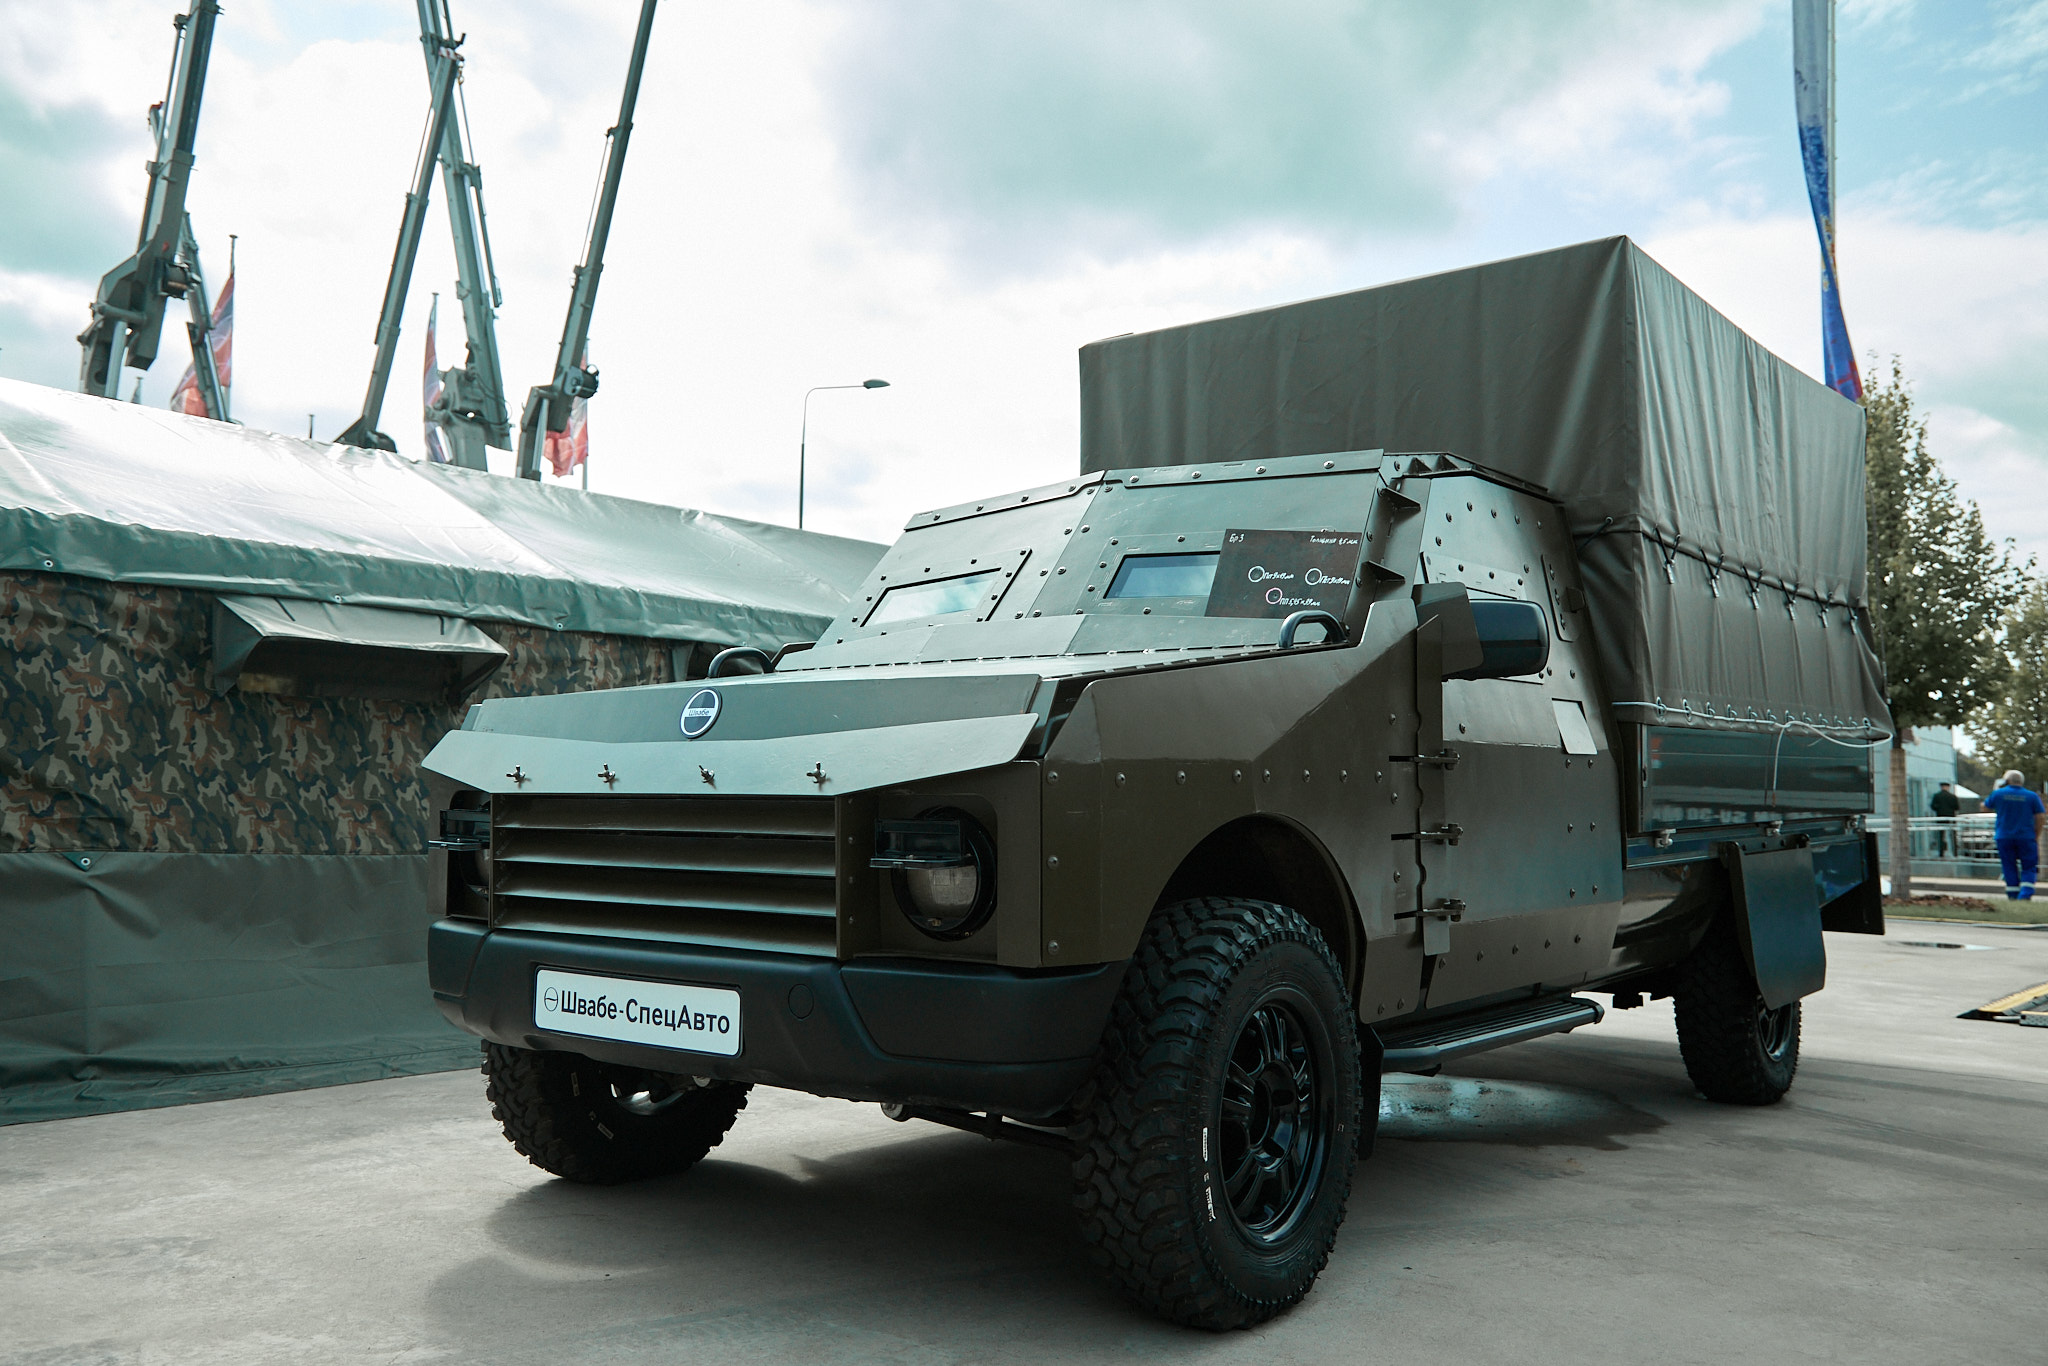 Shvabe Demonstrates an Armored Cargo Pickup Truck